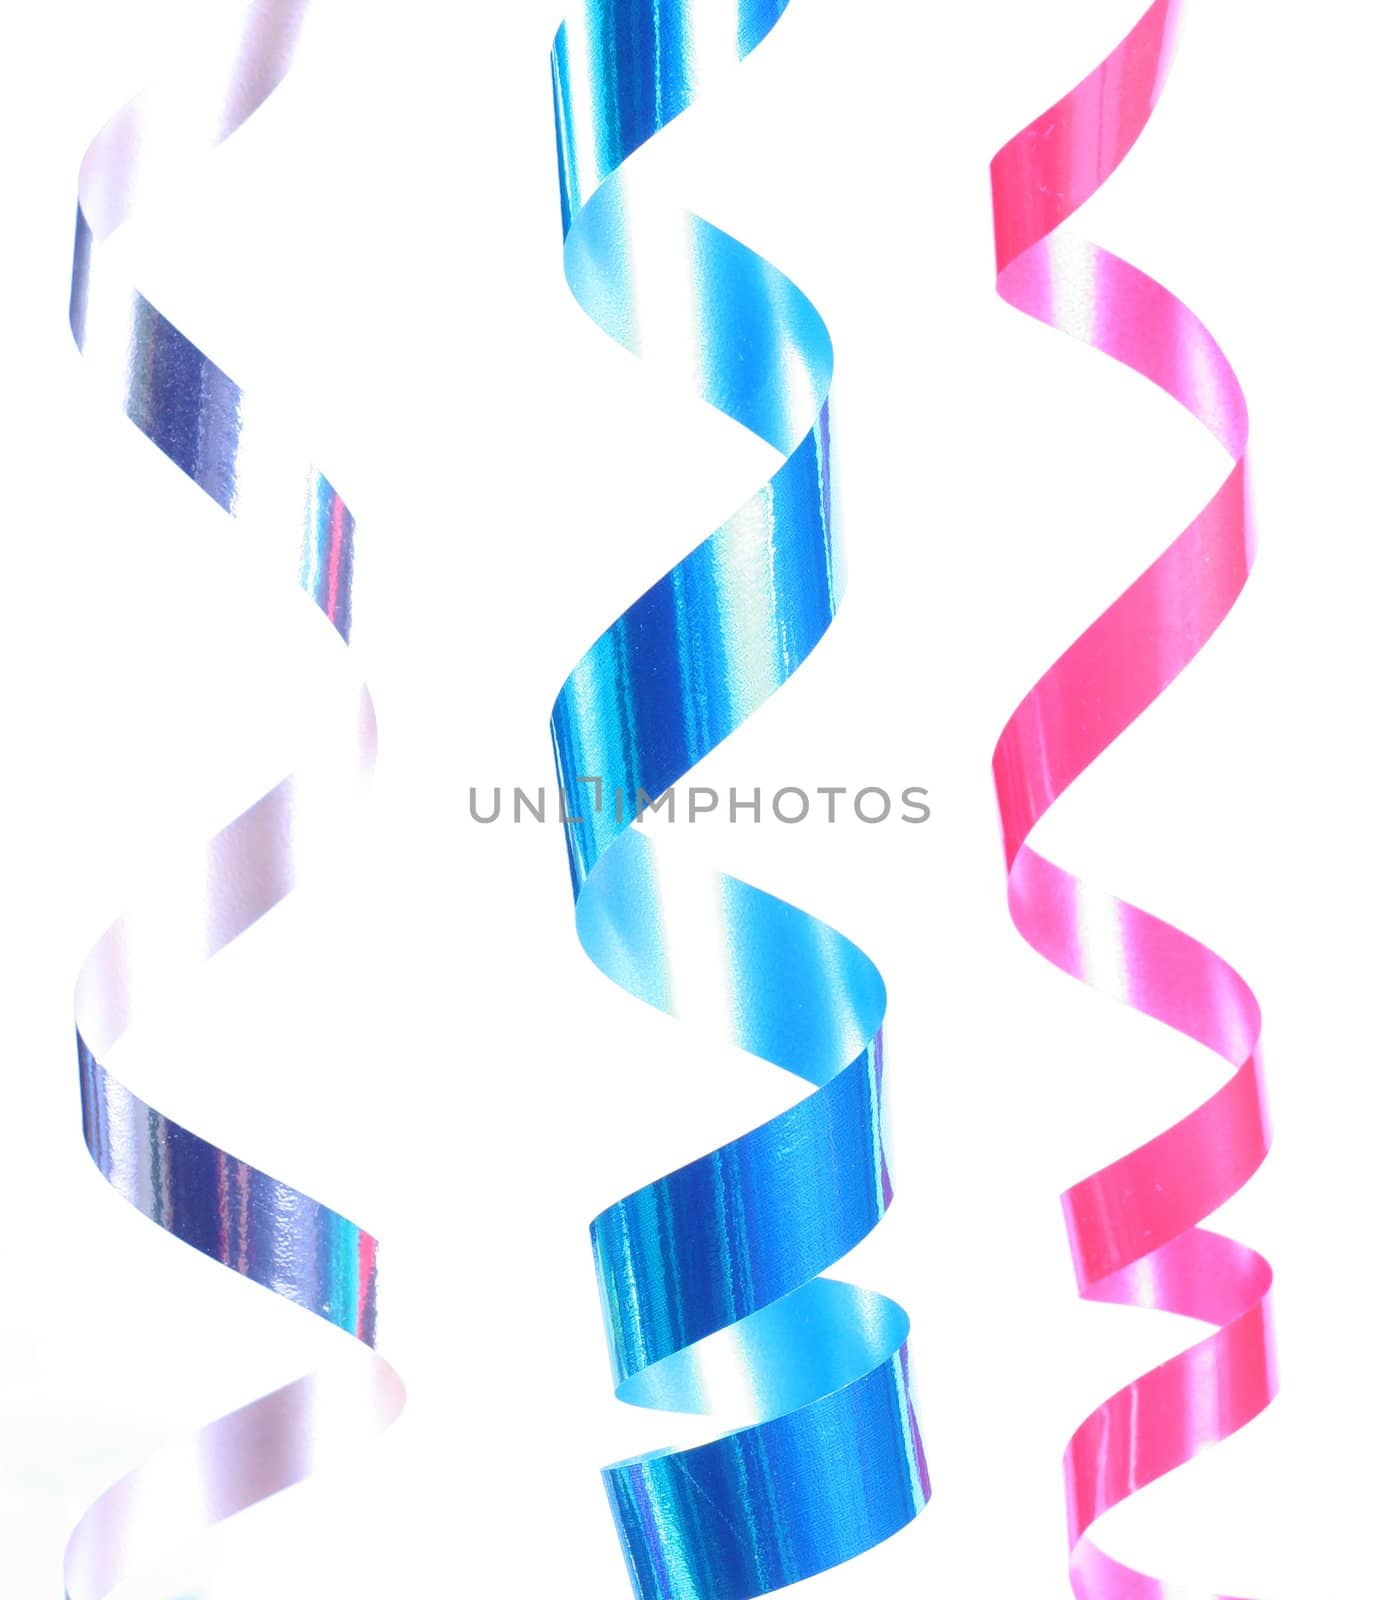 Shiny colorful satin ribbons by jarenwicklund